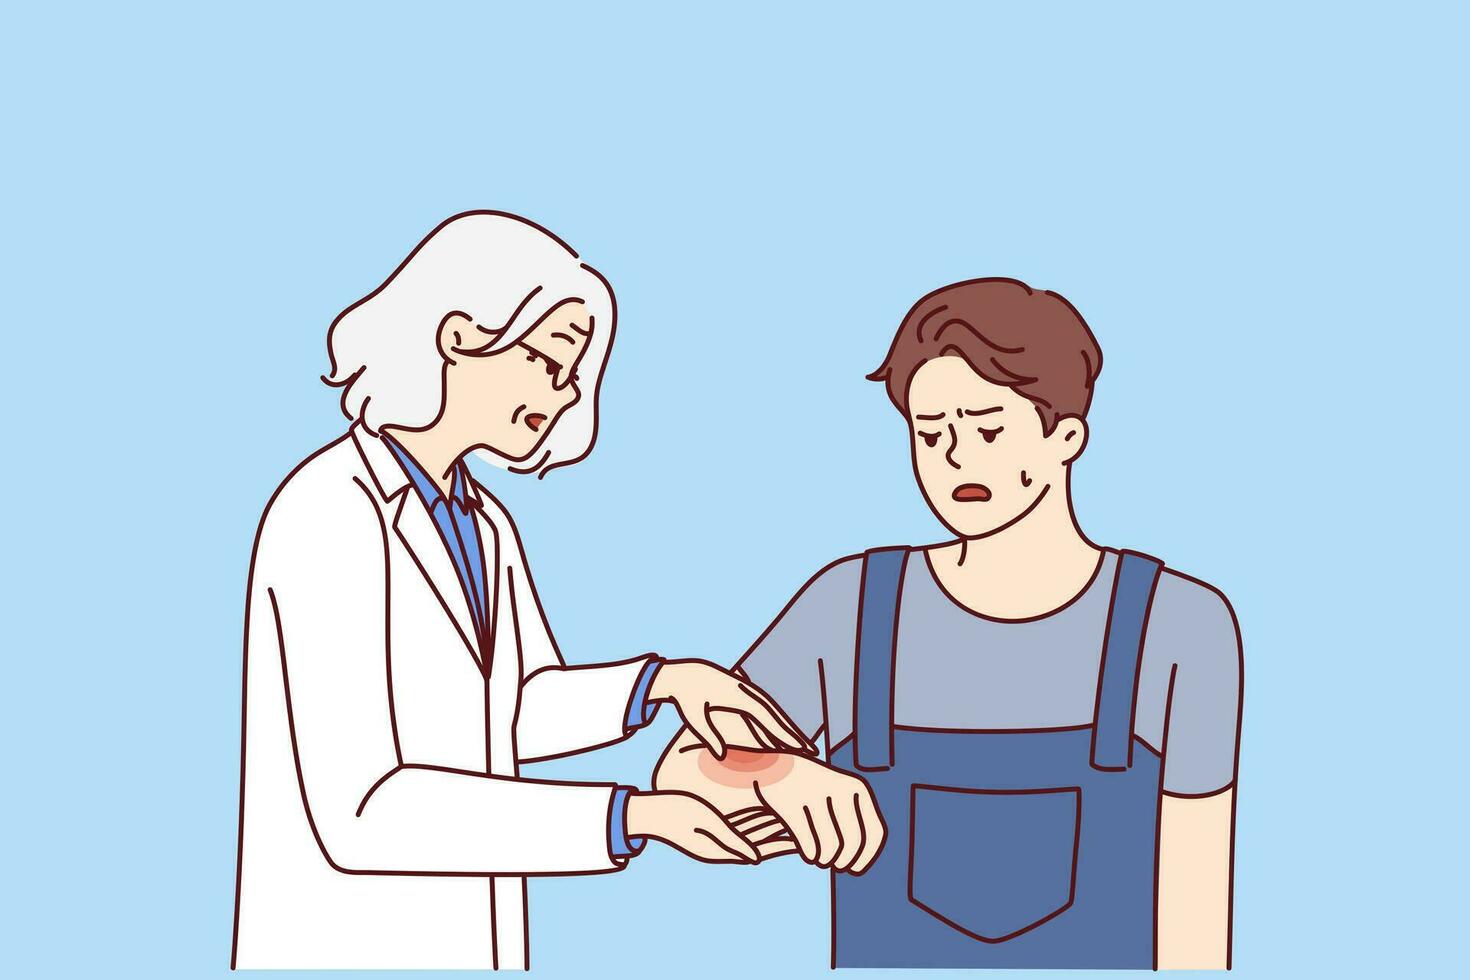 Man with hand injury goes to doctor for help for treatment or for advice on rehabilitation. Elderly woman doctor helps guy in uniform to cure injury received during construction work vector